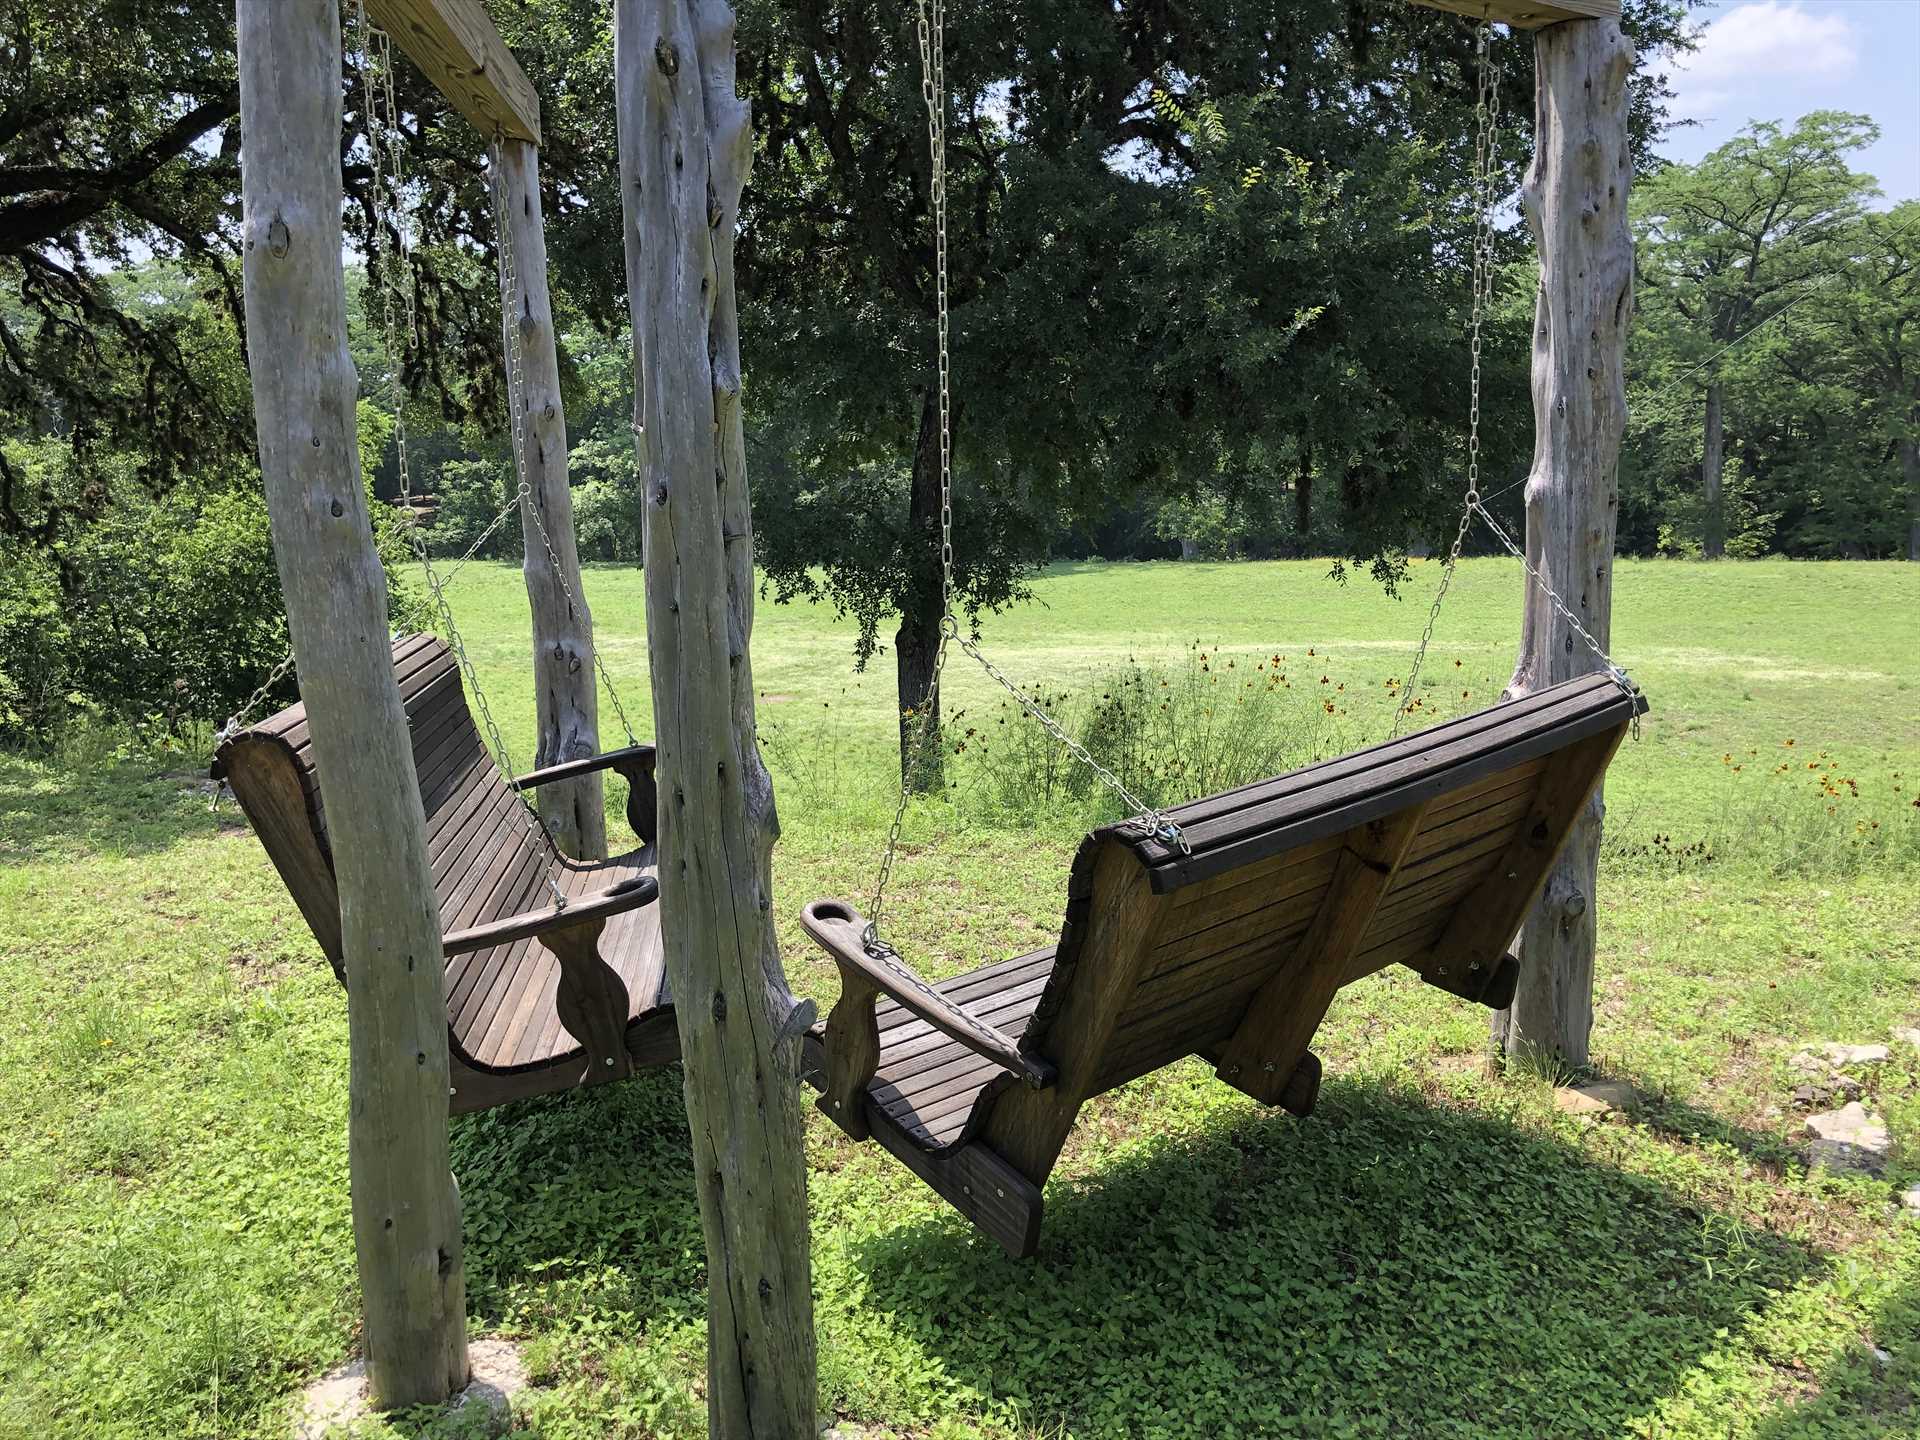                                                 The twin swings at Rocky River are wonderful for snuggling, stargazing, and wildlife watching.